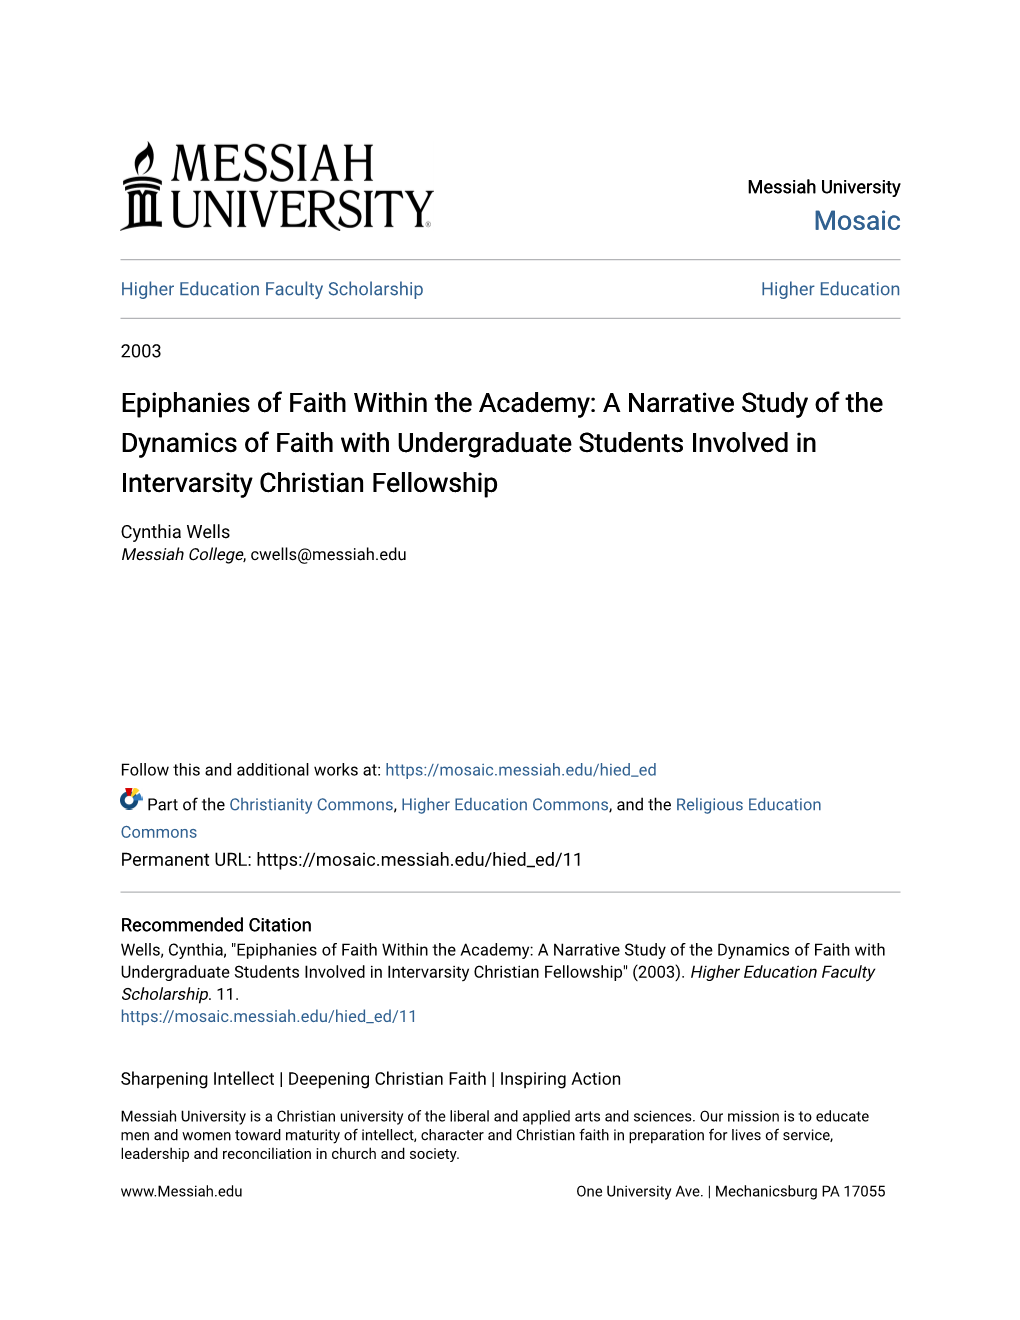 Epiphanies of Faith Within the Academy: a Narrative Study of the Dynamics of Faith with Undergraduate Students Involved in Intervarsity Christian Fellowship